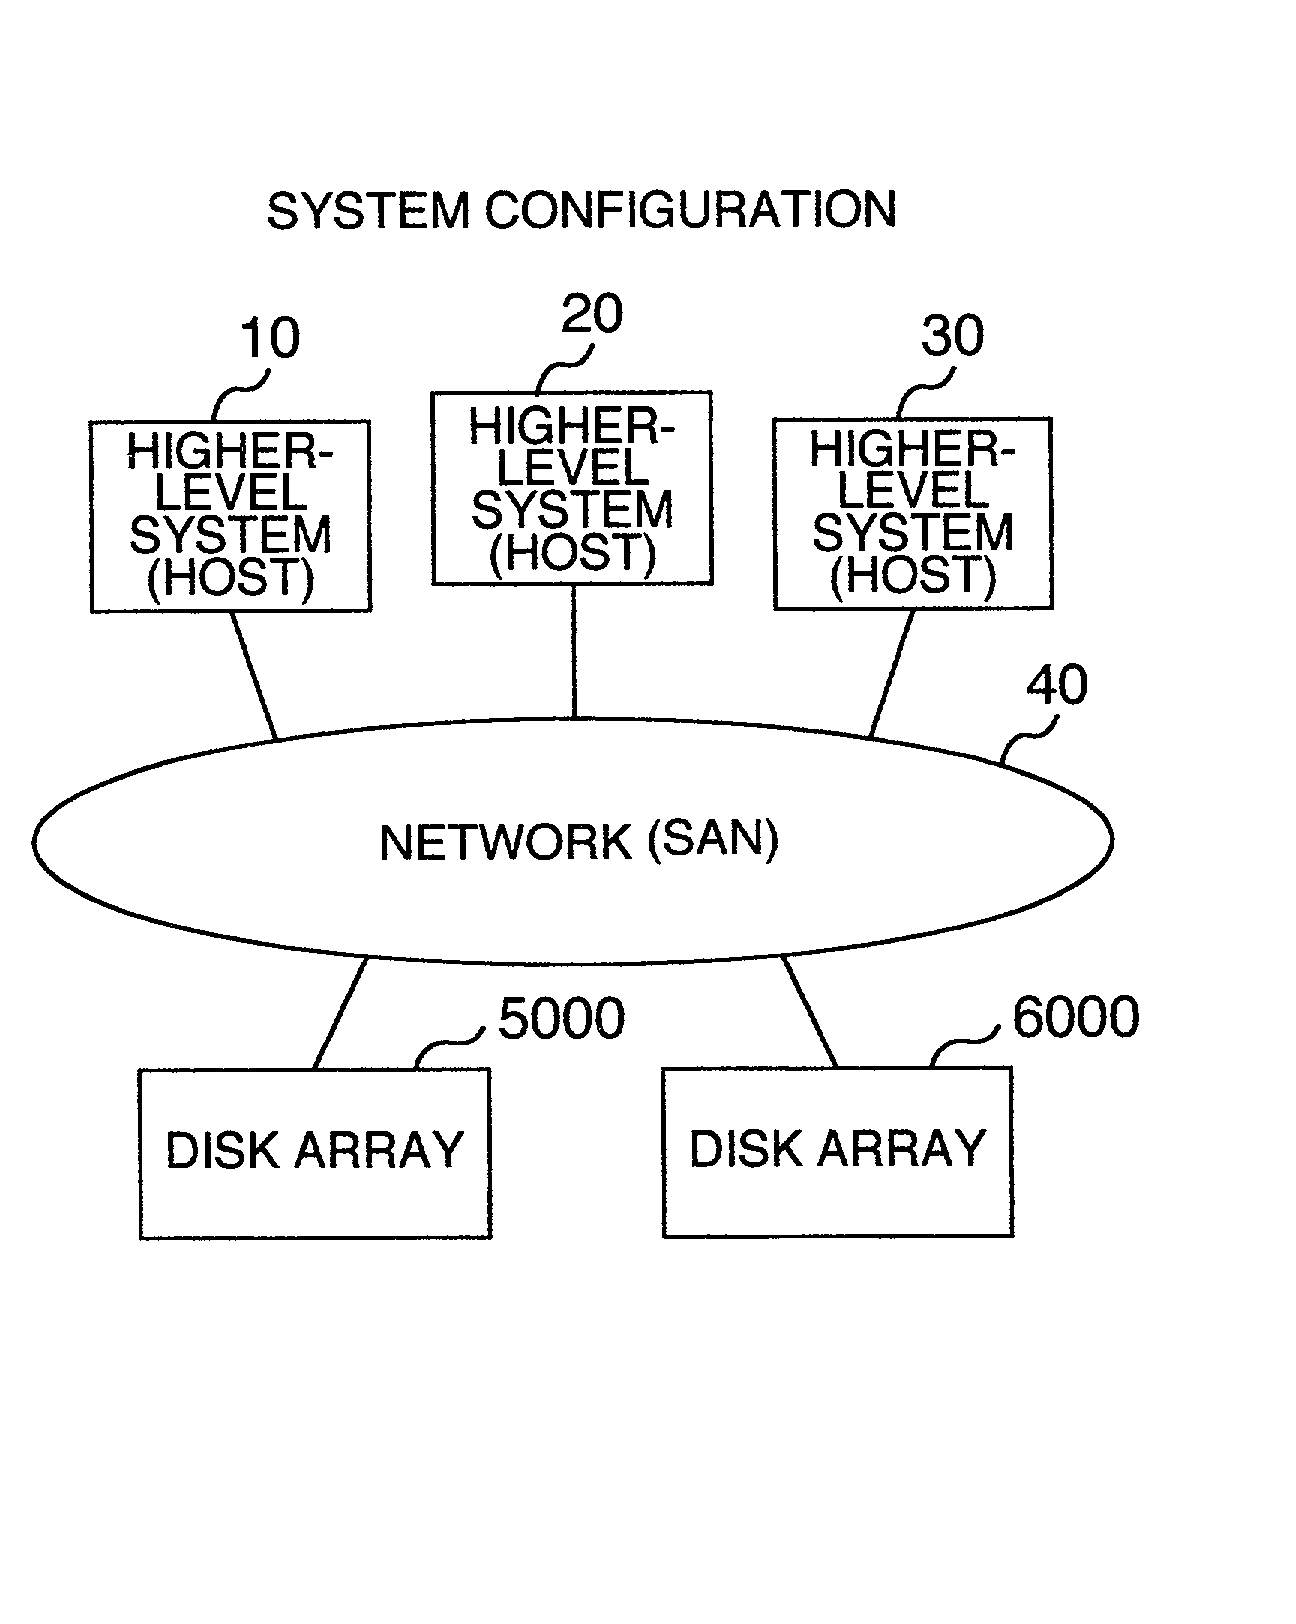 Storage subsystem that connects fibre channel and supports online backup